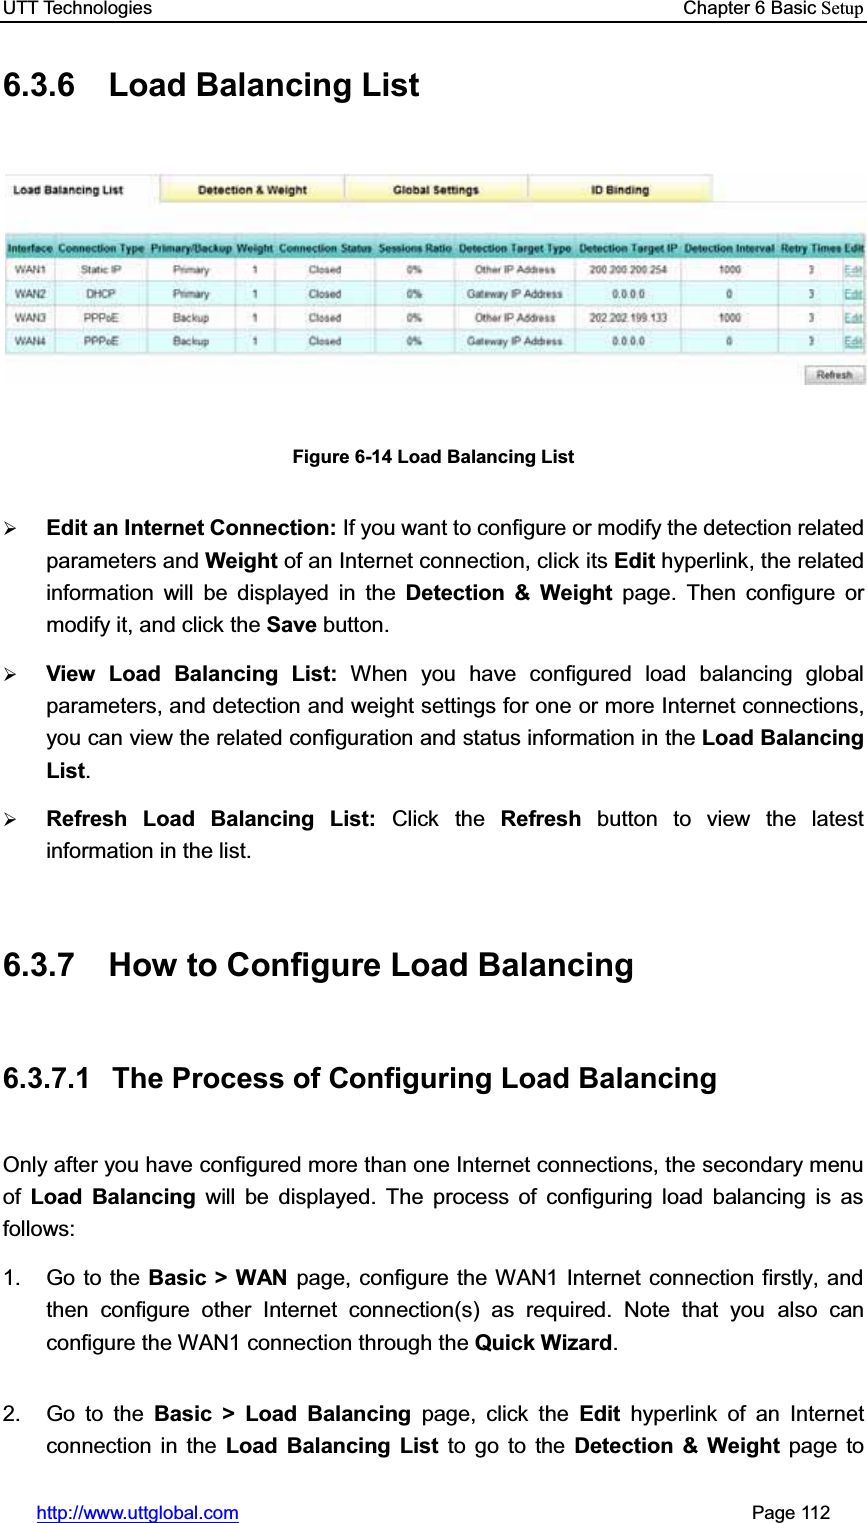 UTT Technologies    Chapter 6 Basic Setuphttp://www.uttglobal.com                                                       Page 112 6.3.6  Load Balancing List Figure 6-14 Load Balancing List¾Edit an Internet Connection: If you want to configure or modify the detection related parameters and Weight of an Internet connection, click its Edit hyperlink, the related information will be displayed in the Detection &amp; Weight page. Then configure or modify it, and click the Save button.¾View Load Balancing List: When you have configured load balancing global parameters, and detection and weight settings for one or more Internet connections, you can view the related configuration and status information in the Load Balancing List.¾Refresh Load Balancing List: Click the Refresh button to view the latest information in the list. 6.3.7  How to Configure Load Balancing 6.3.7.1  The Process of Configuring Load Balancing Only after you have configured more than one Internet connections, the secondary menuof  Load Balancing will be displayed. The process of configuring load balancing is as follows: 1. Go to the Basic &gt; WAN page, configure the WAN1 Internet connection firstly, and then configure other Internet connection(s) as required. Note that you also can configure the WAN1 connection through the Quick Wizard.2. Go to the Basic &gt; Load Balancing page, click the Edit hyperlink of an Internet connection in the Load Balancing List to go to the Detection &amp; Weight page to 